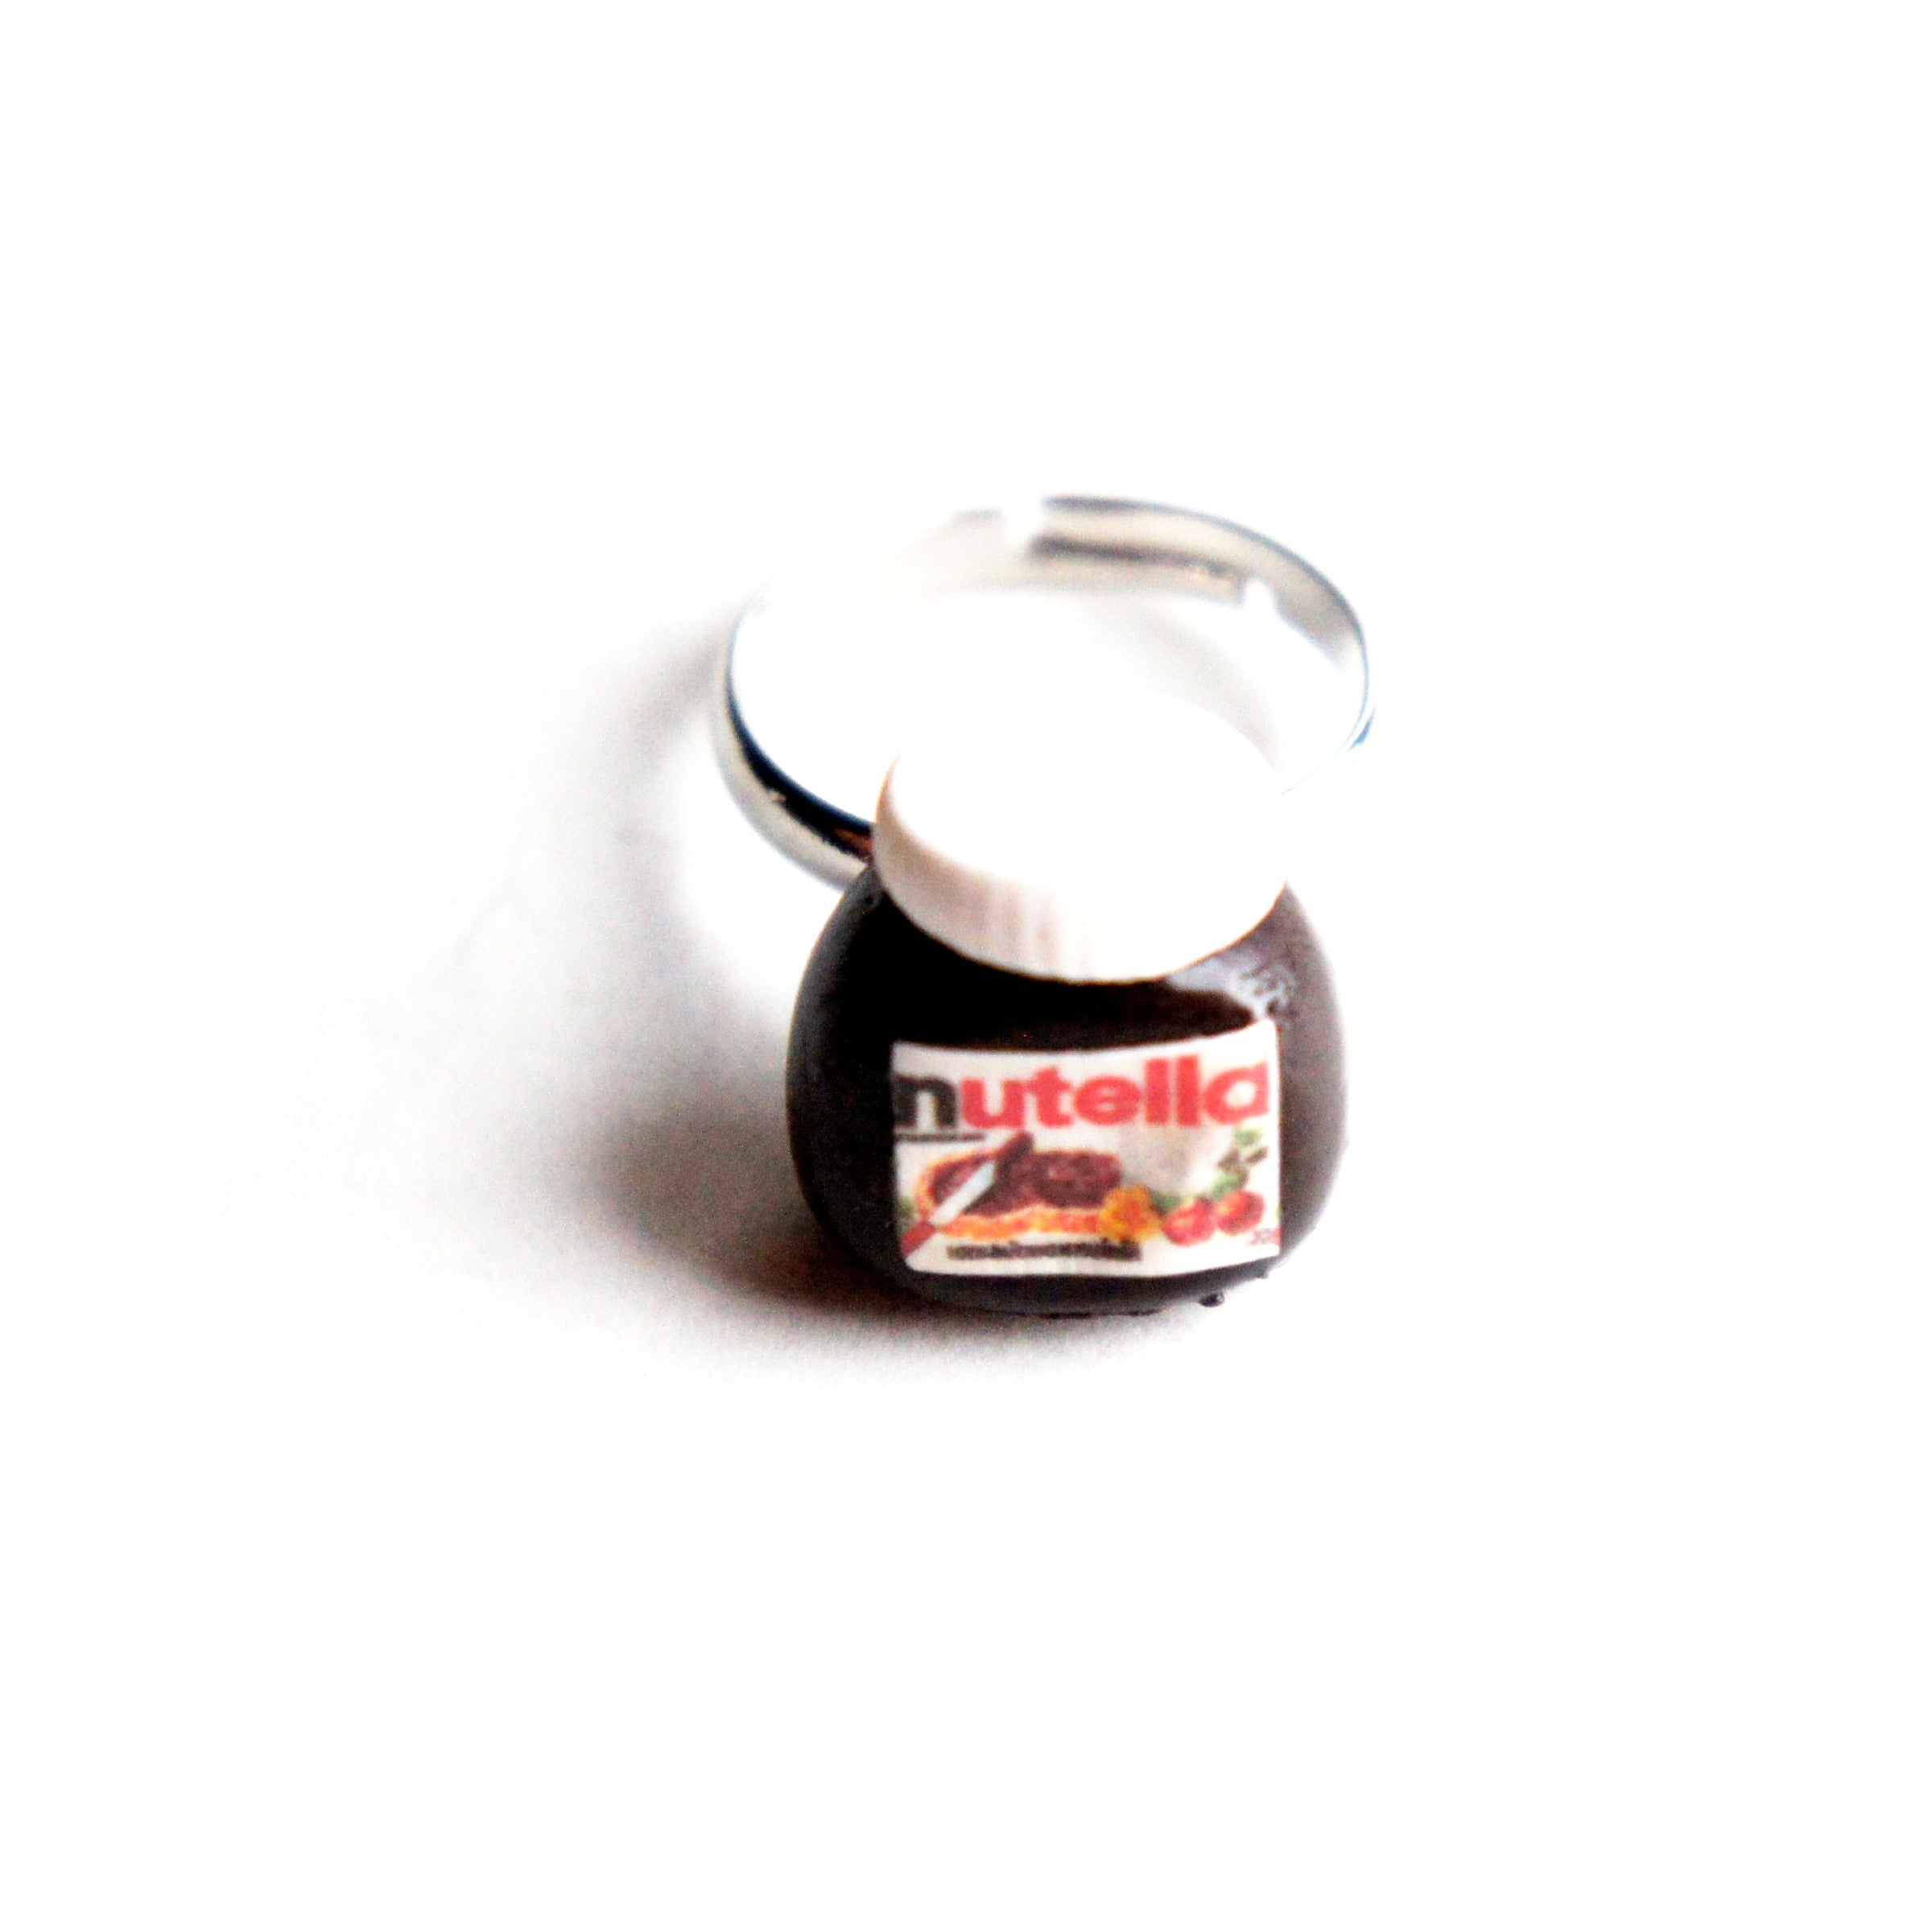 Nutella Jar Ring - Jillicious charms and accessories